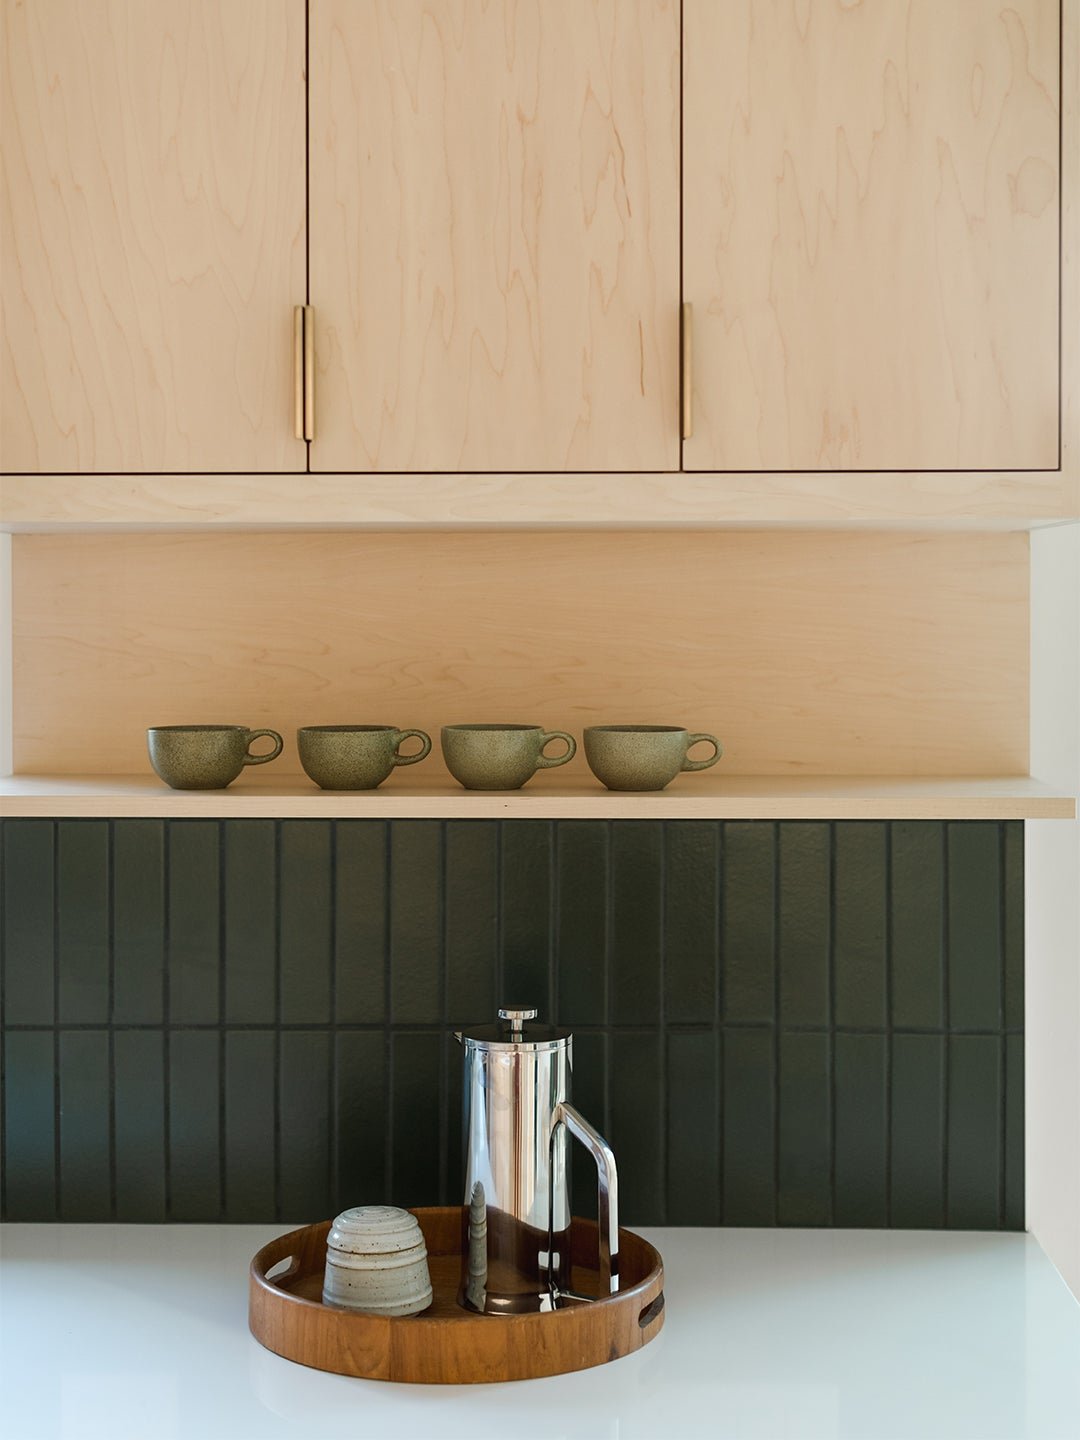 You Don’t Have to Choose Between Open Shelving and Upper Cabinets